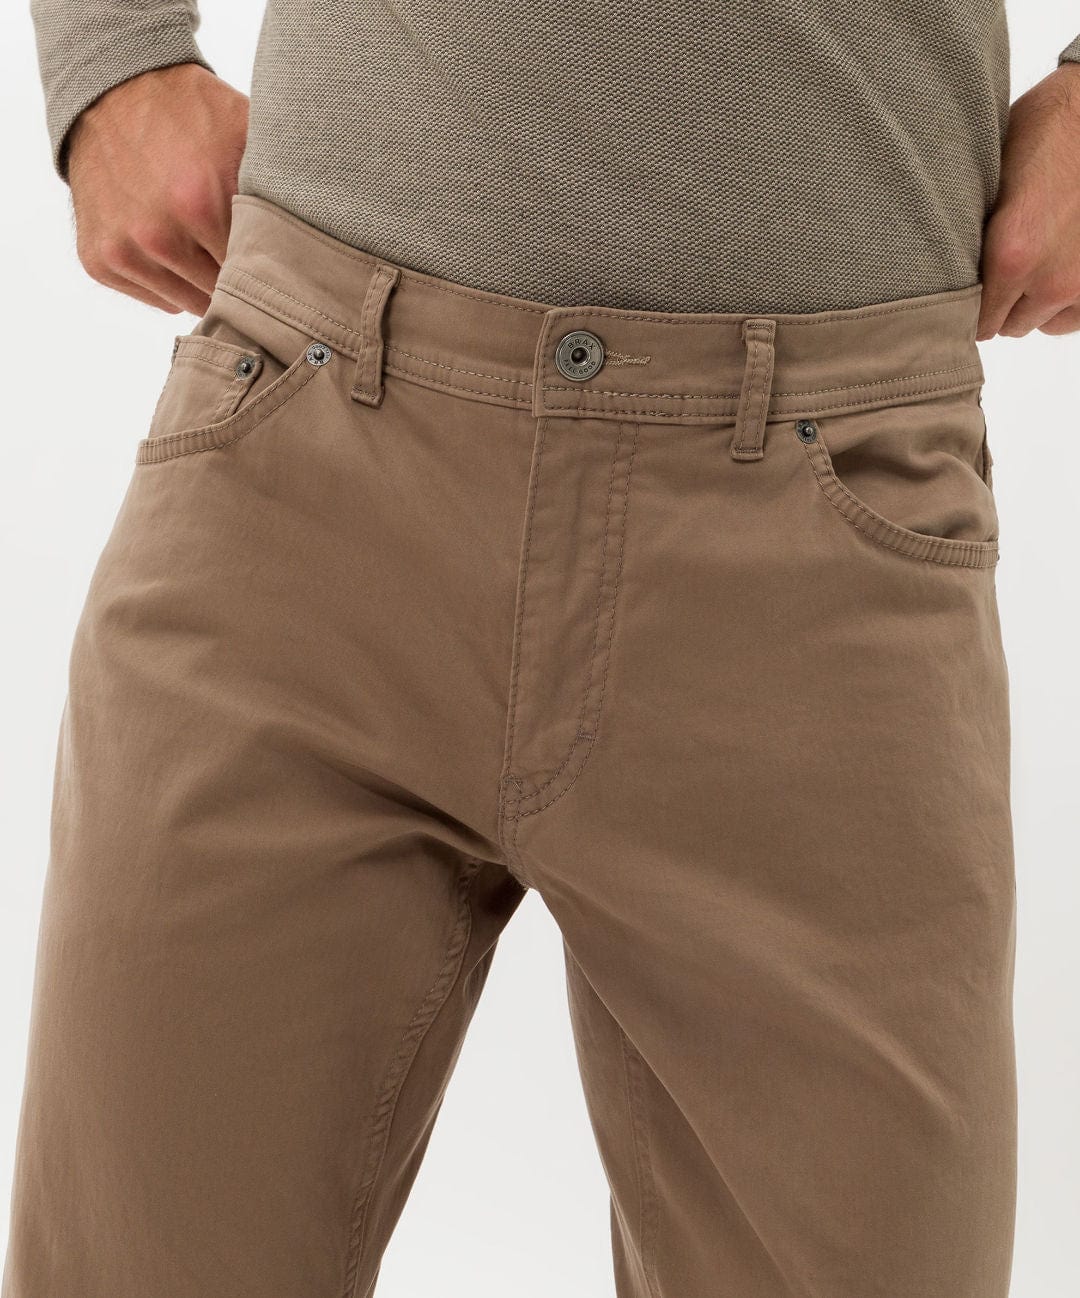 BRAX Trousers for men: Well-dressed for every occasion | ZALANDO